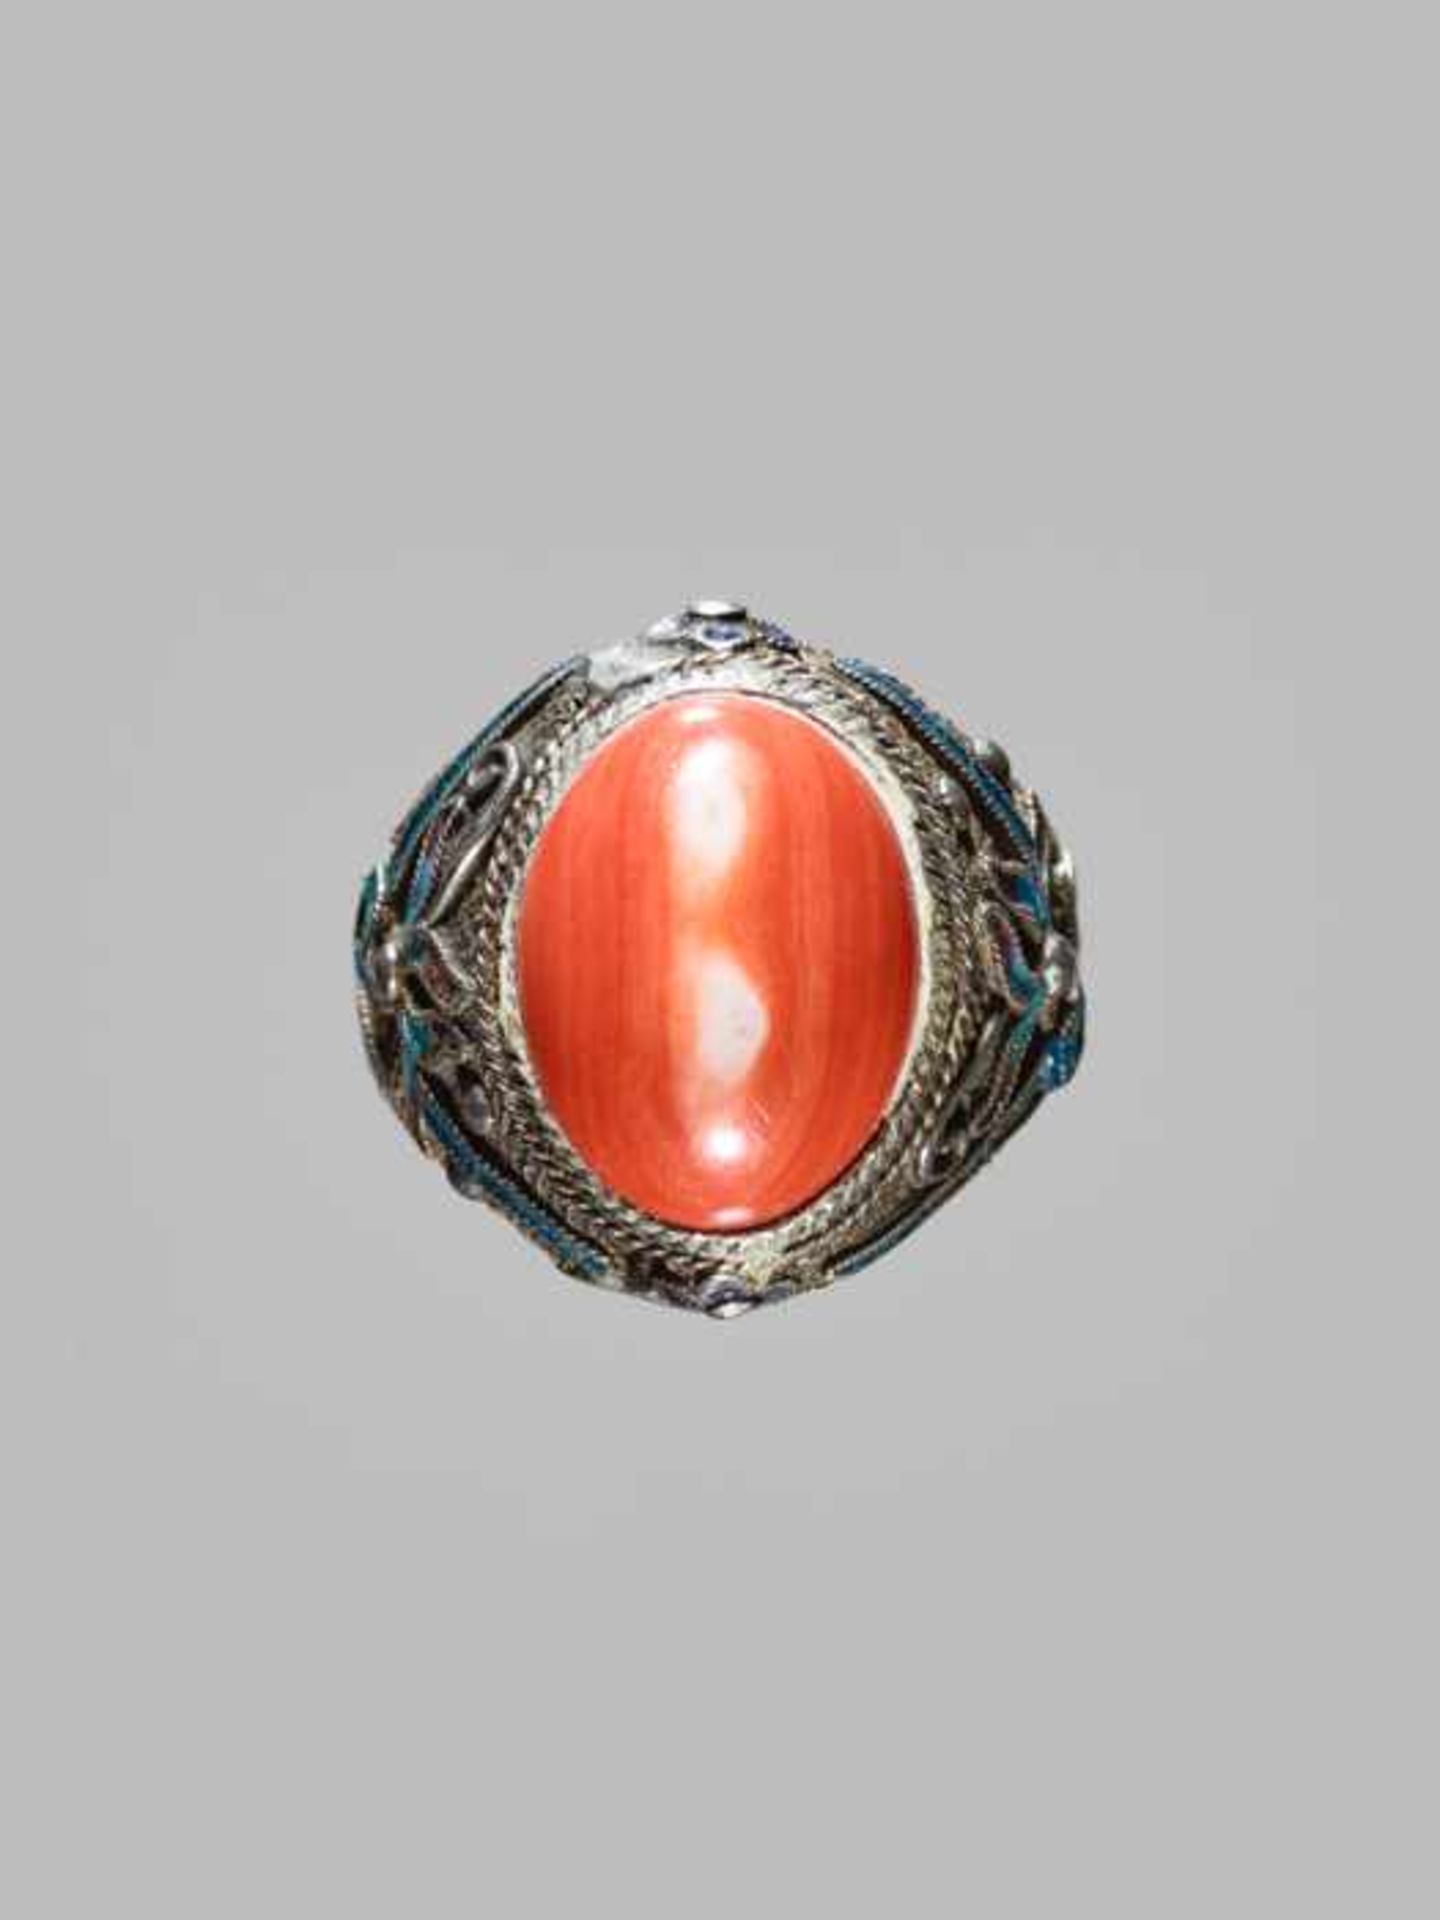 AN ENAMELED EXPORT SILVER RING WITH A LARGE CORAL CABOCHON, QING DYNASTY Silver and coral, the - Image 3 of 7